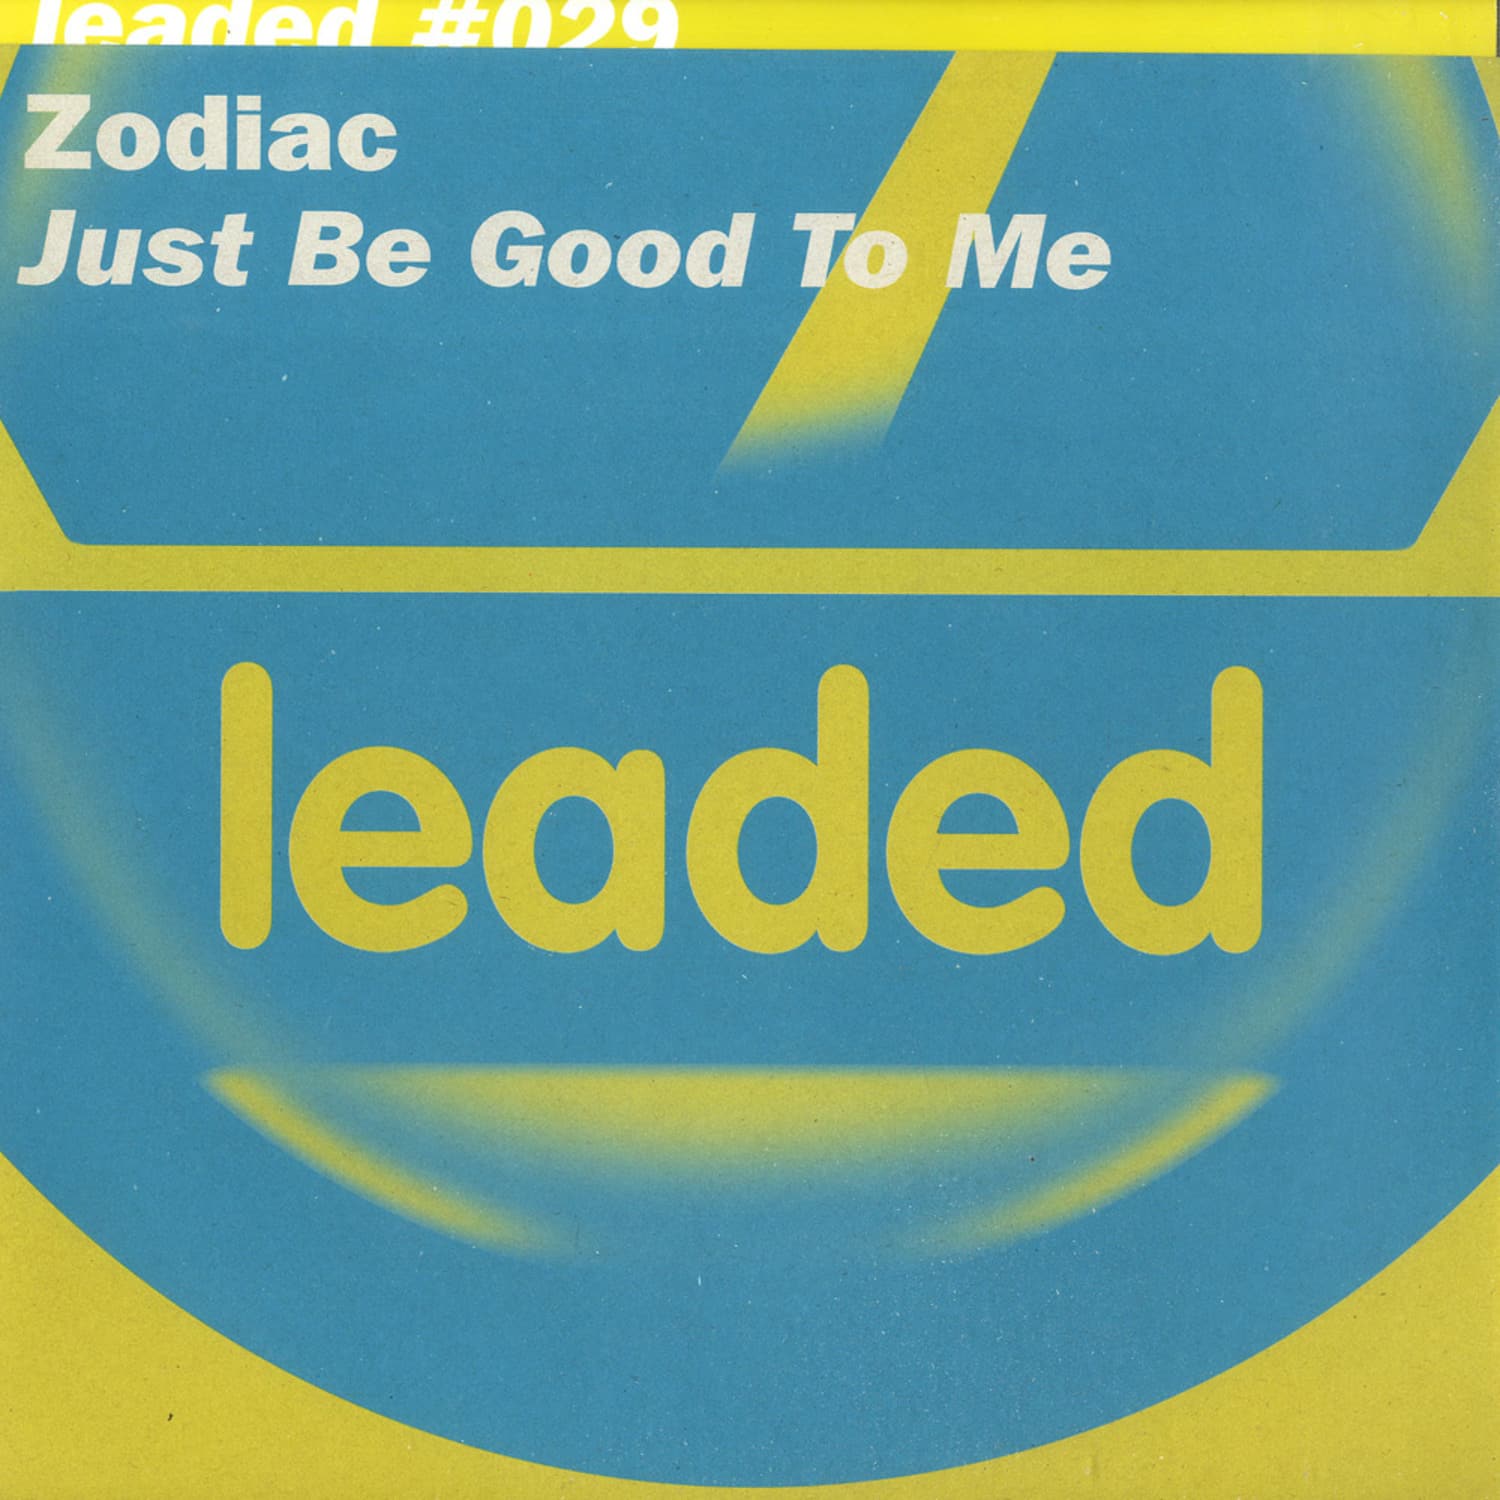 Zodiac - JUST BE GOOD TO ME